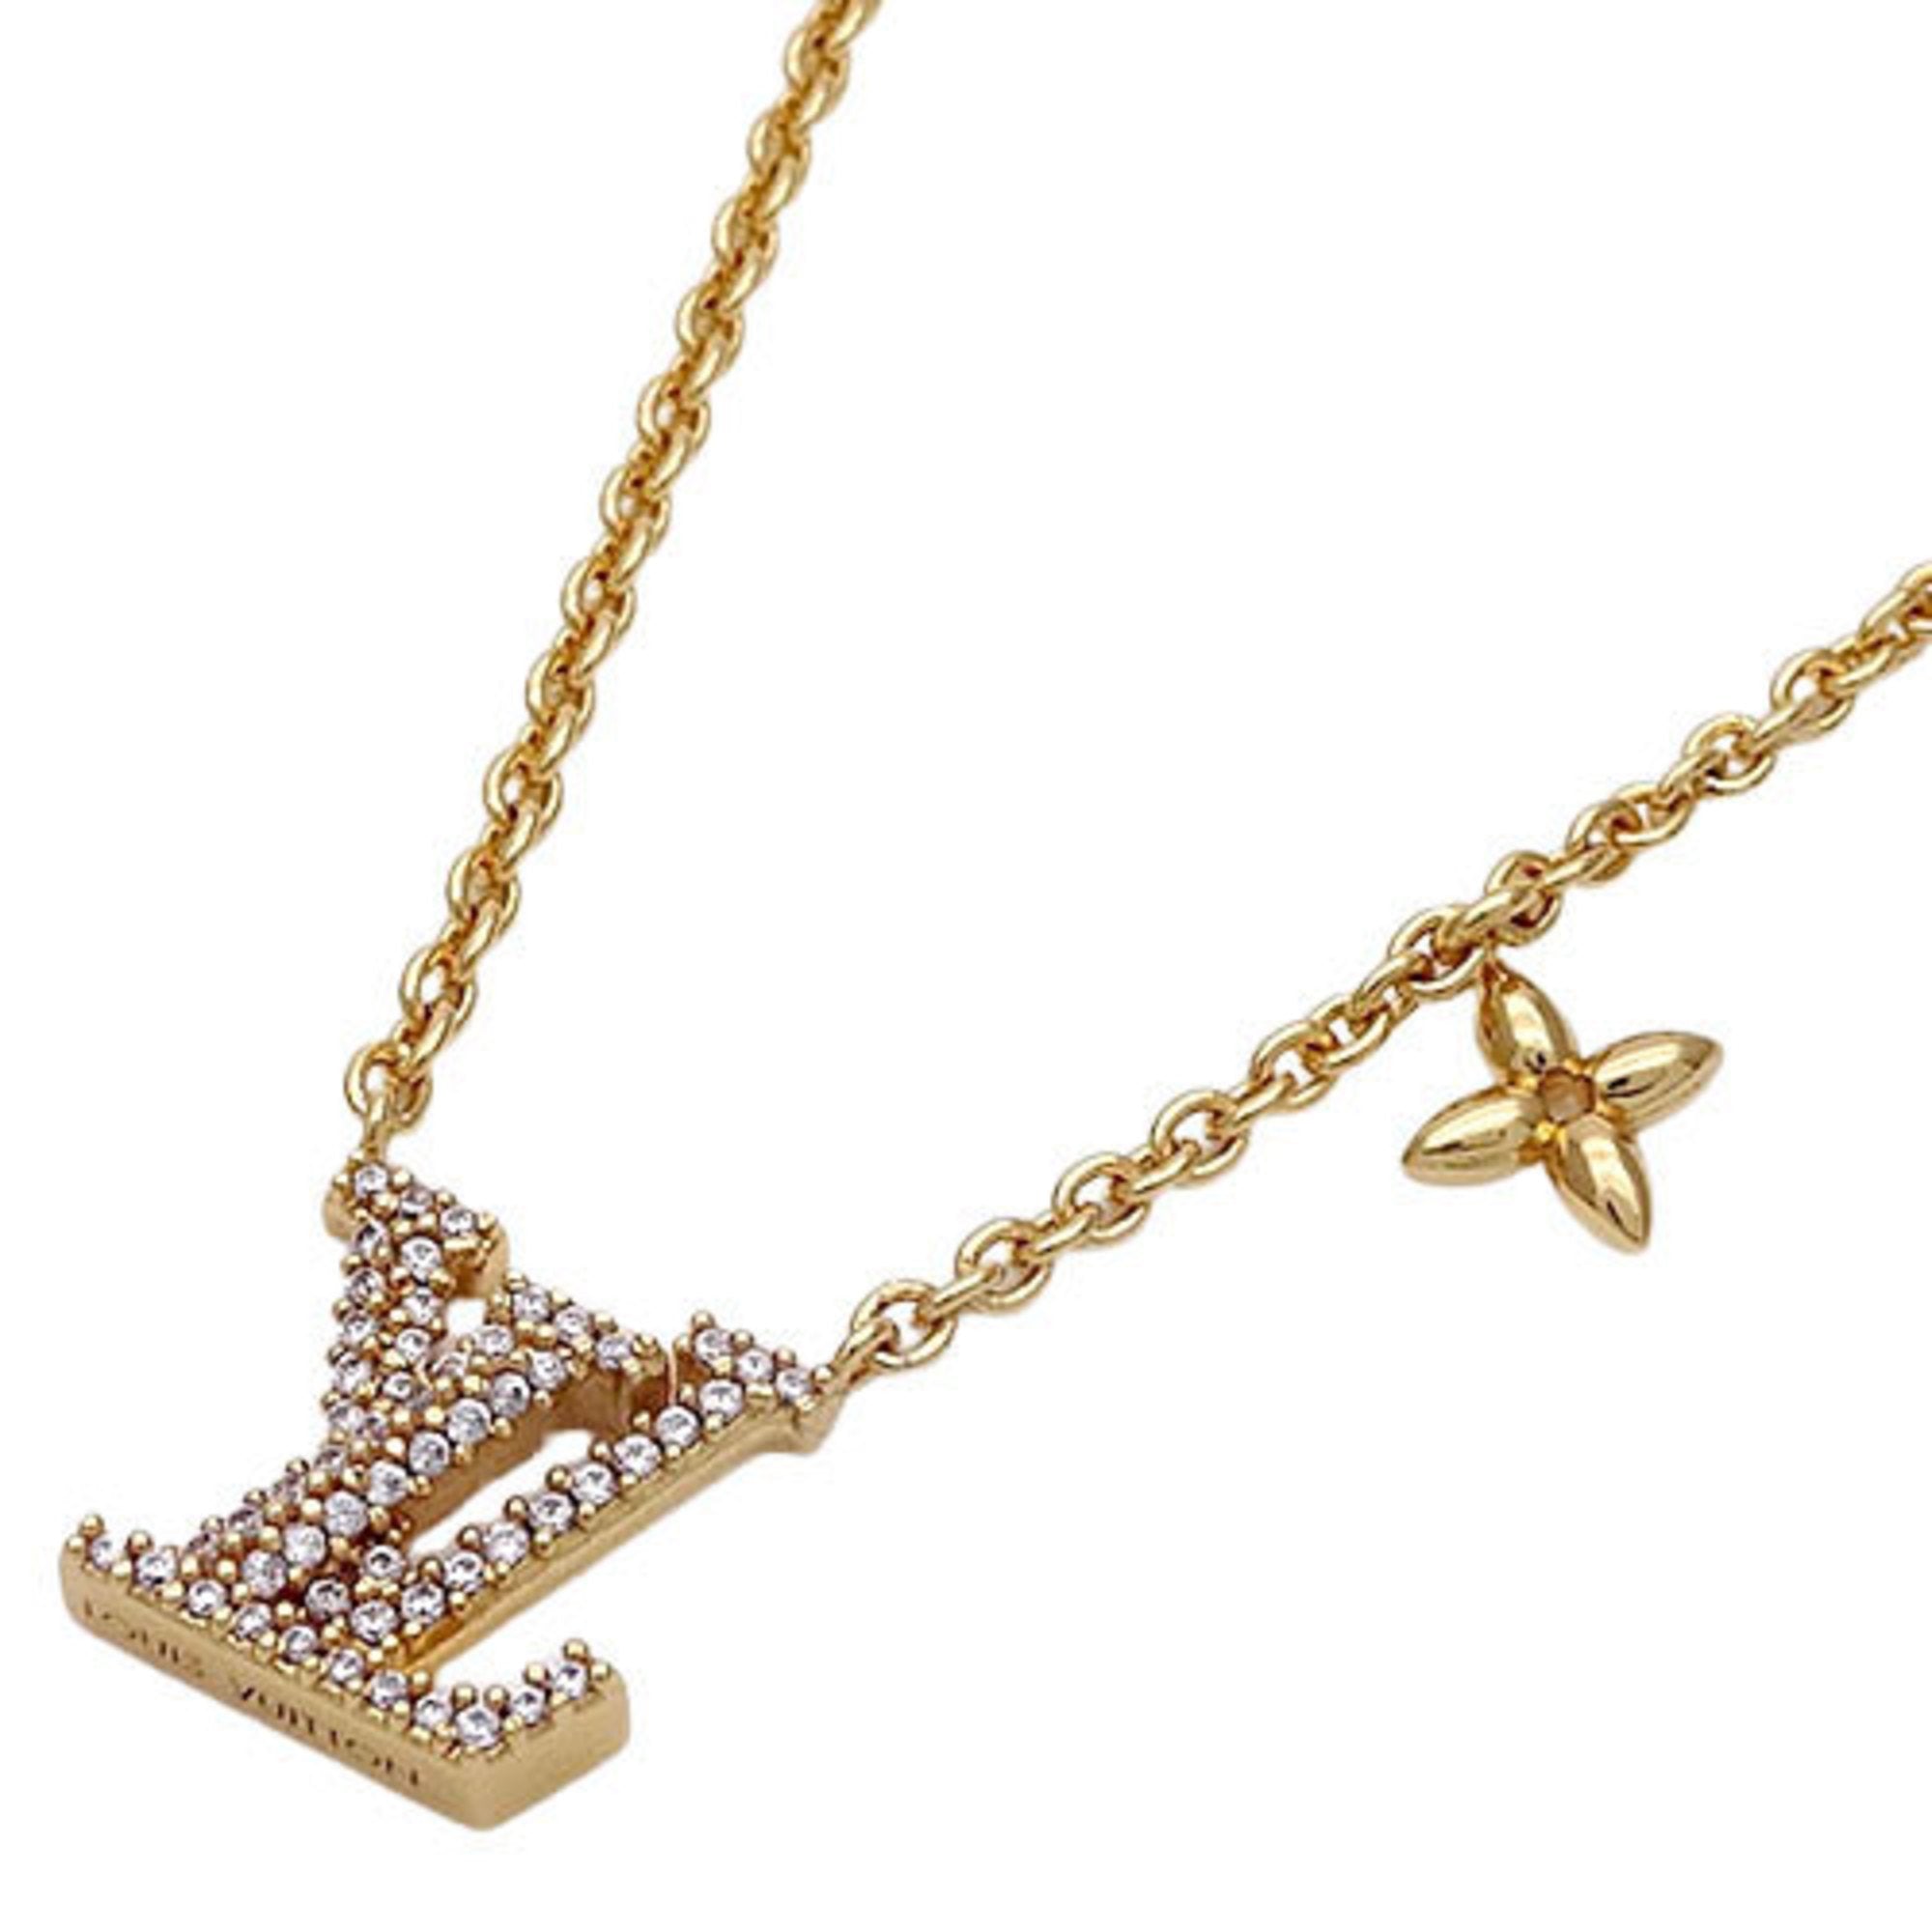 LOUIS VUITTON LOUIS VUITTON Courier LV Iconic Necklace metal Gold Used  women M00596｜Product Code：2106800464146｜BRAND OFF Online Store